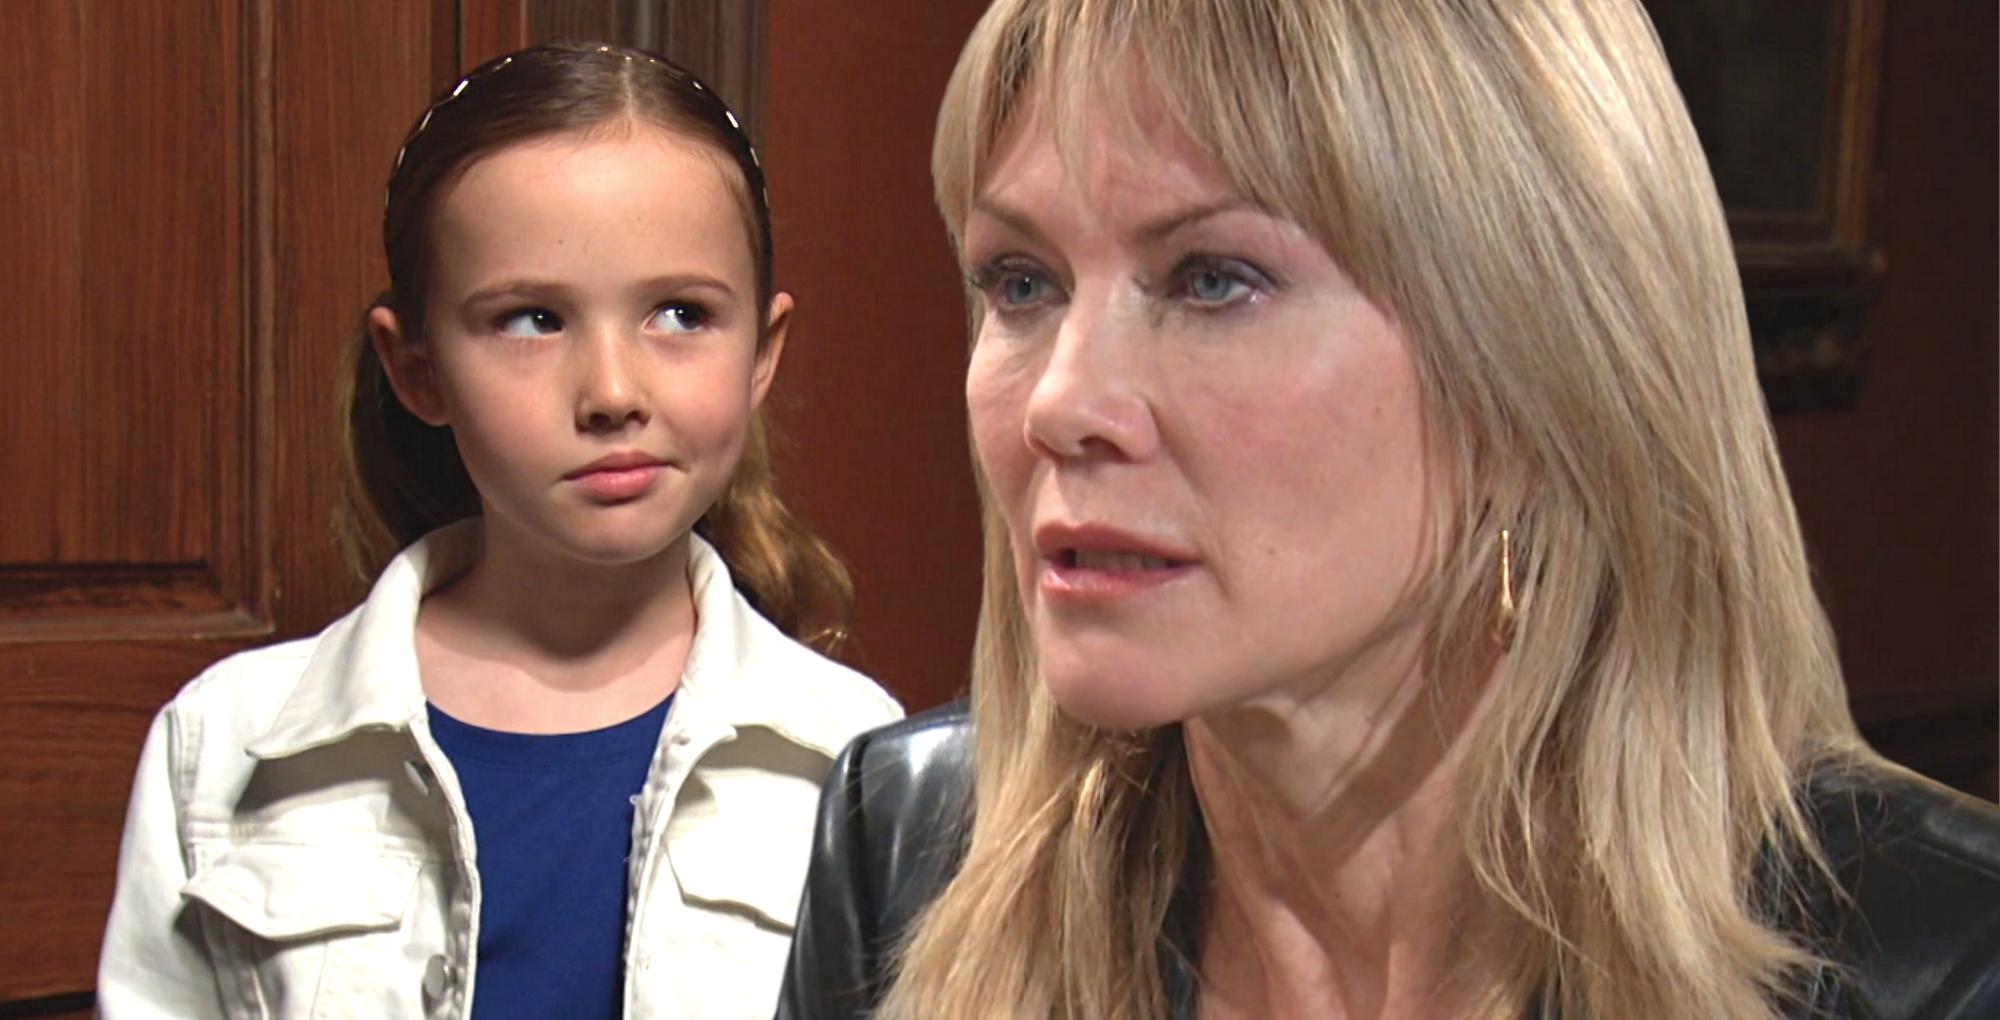 rachel black and her mom, kristen dimera on days of our lives.